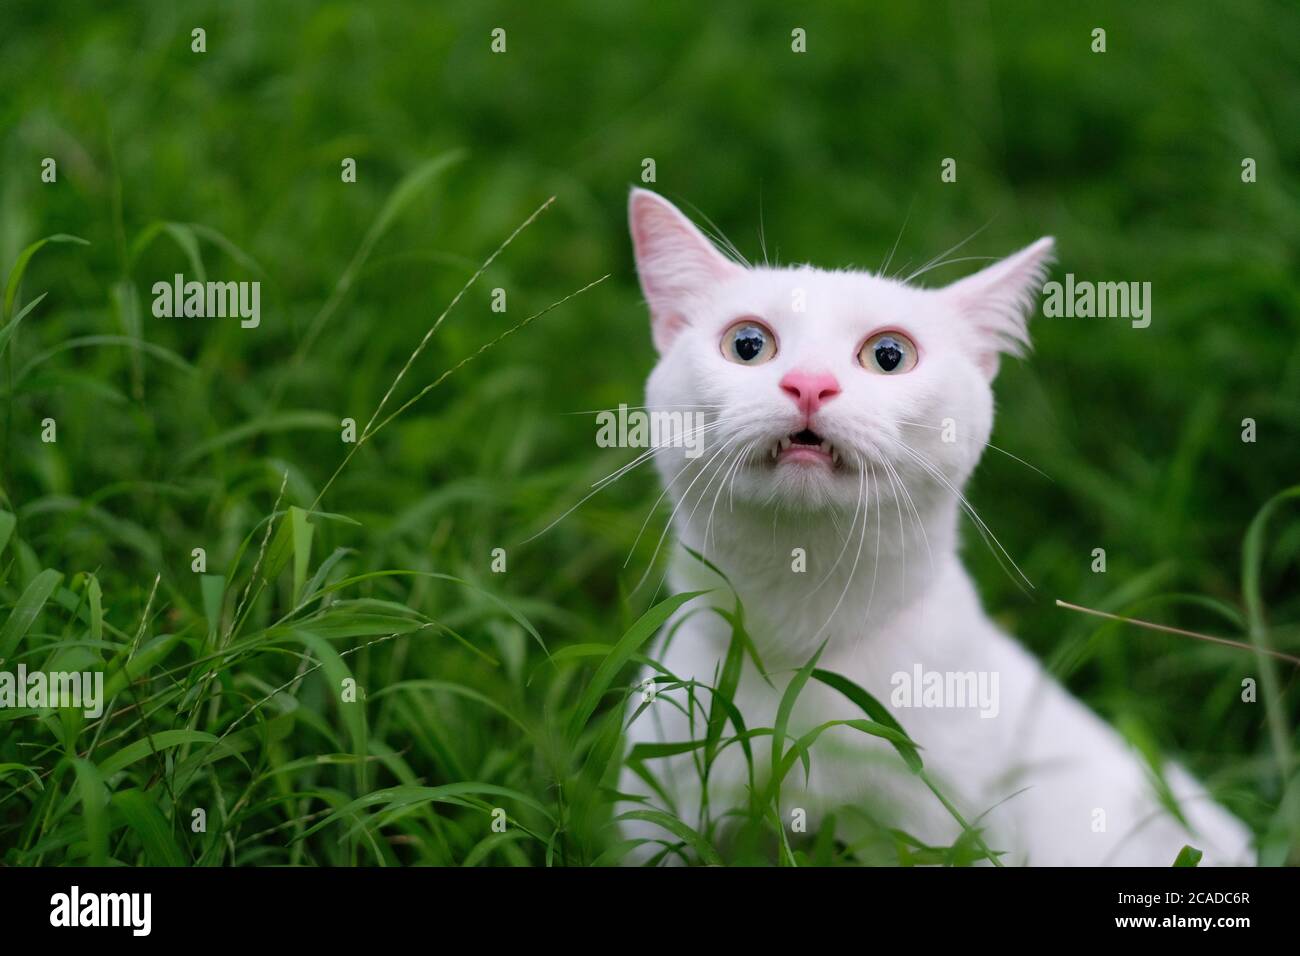 close up one funny white cat in fresh green grass. Mouth opened, eyes wide open looking at camera. Blur background Stock Photo